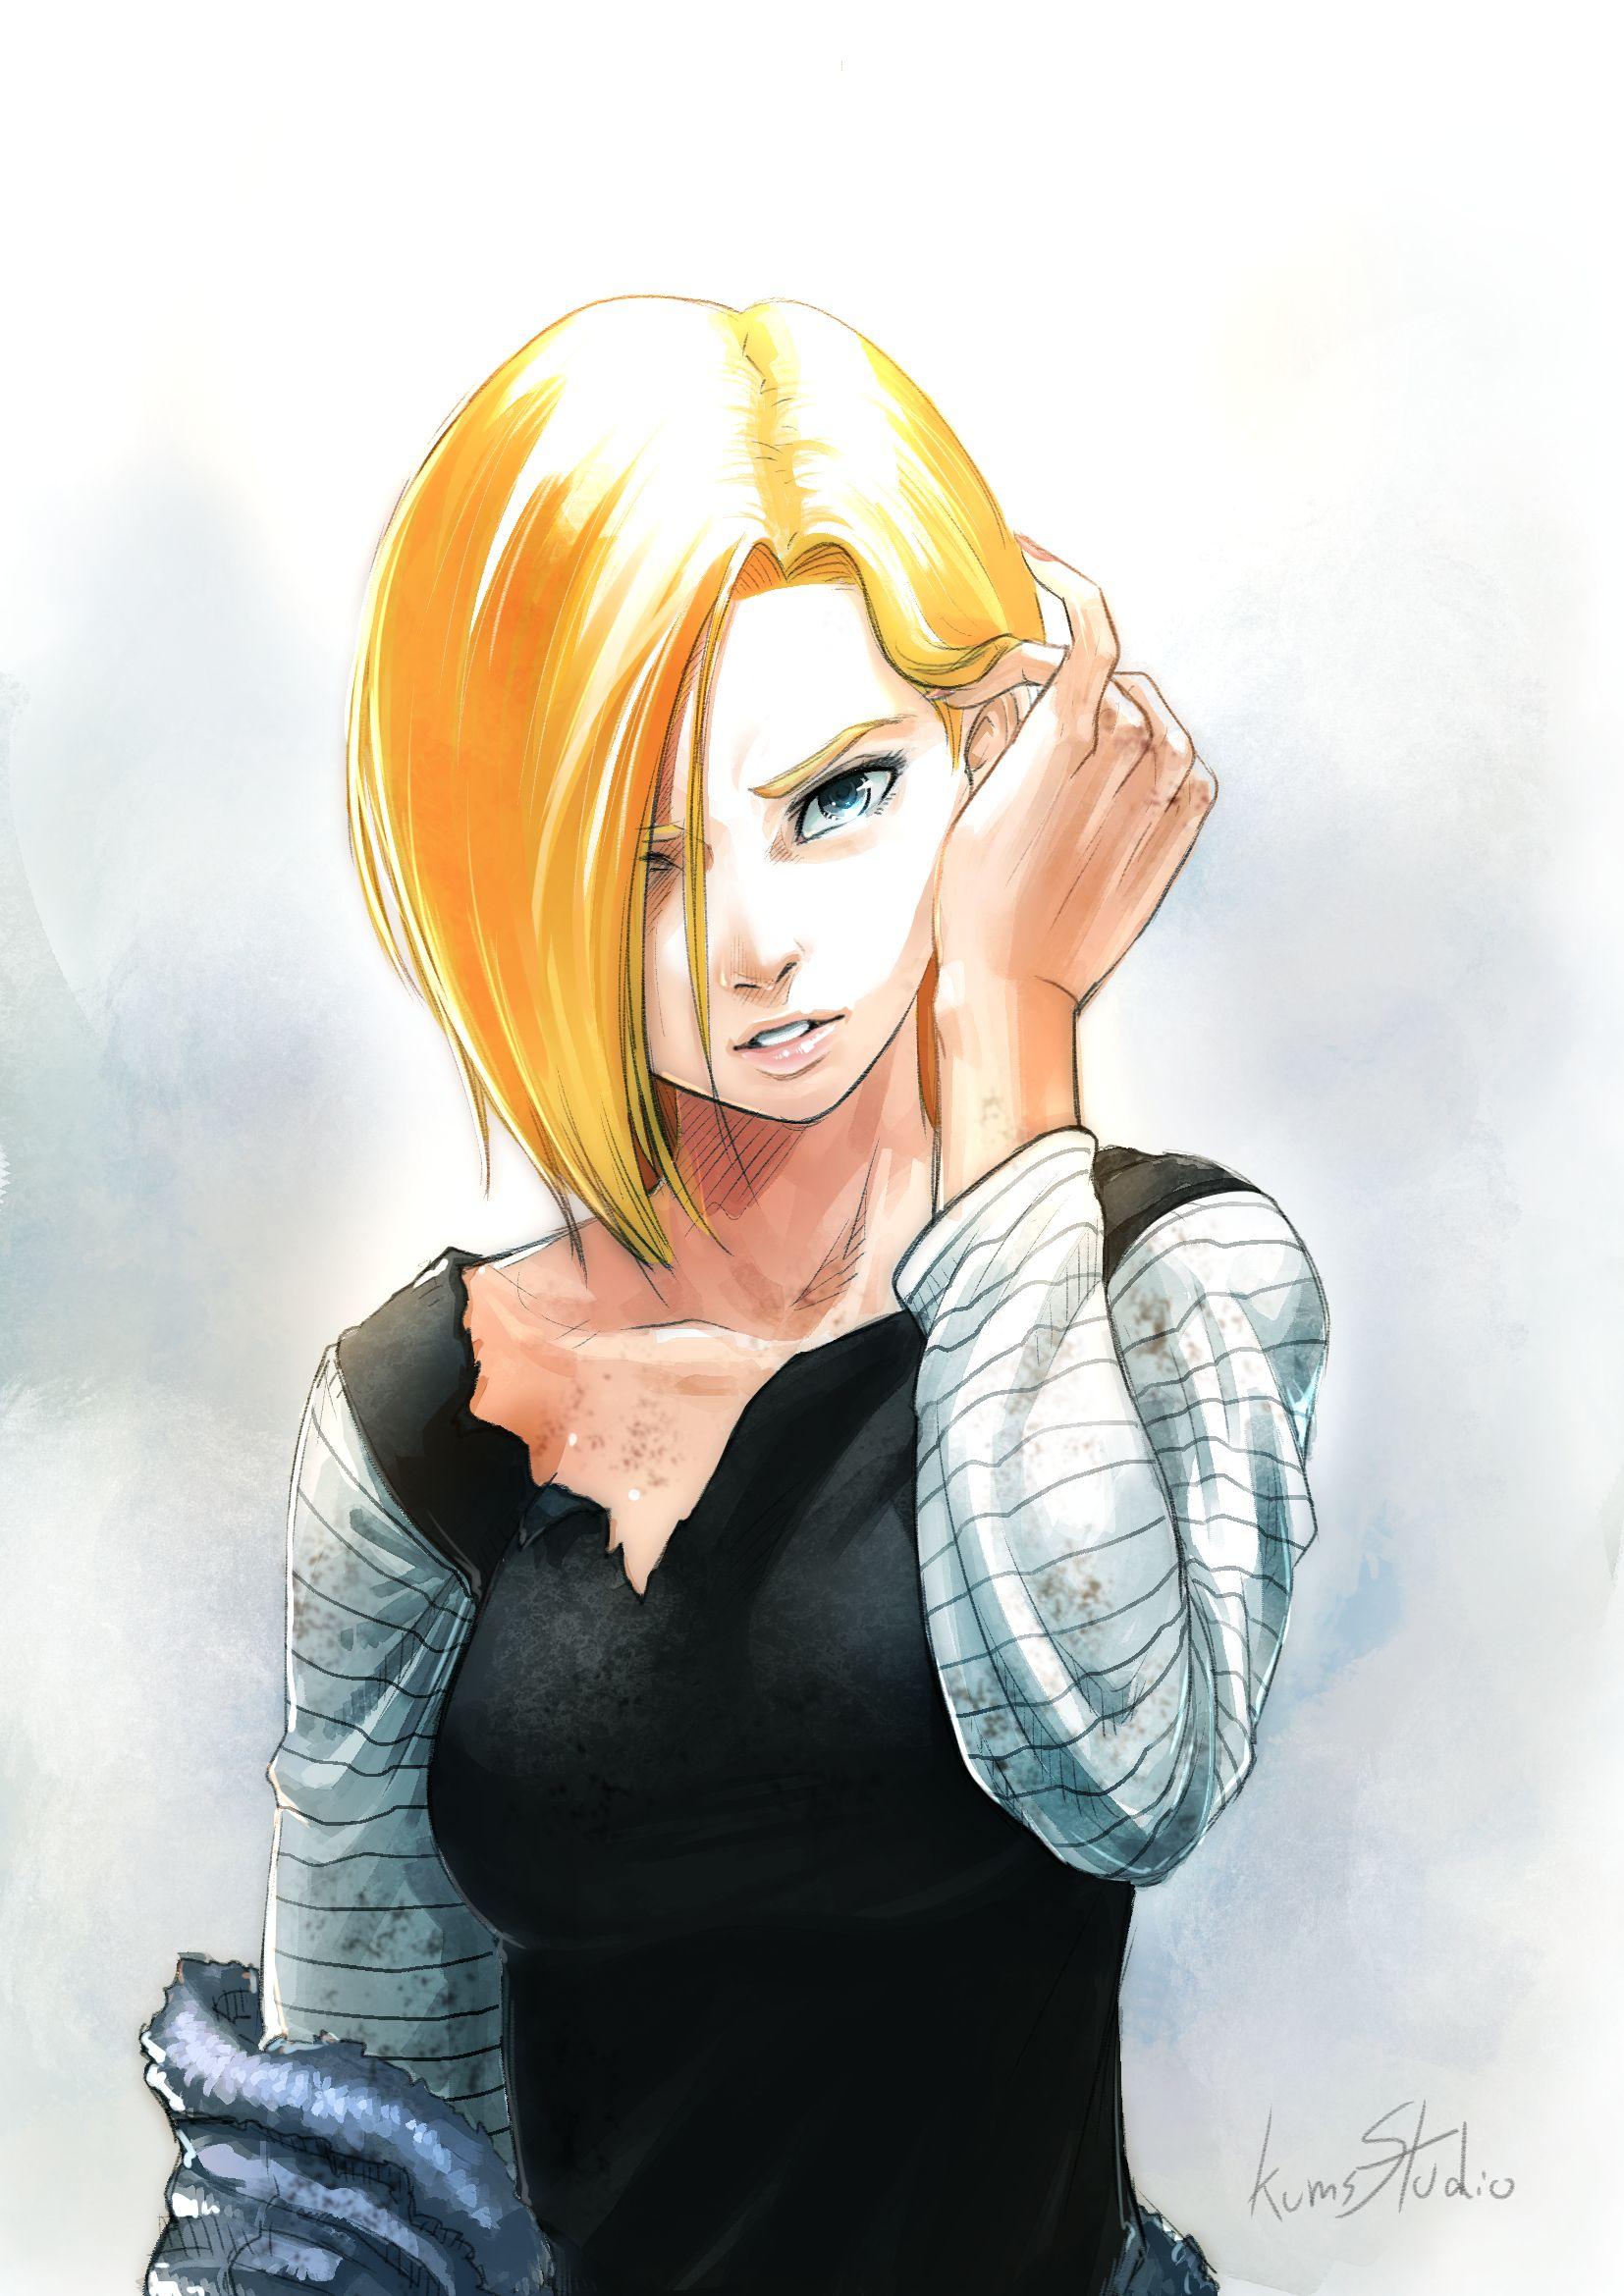 Android 18 BALL Z Wallpaper